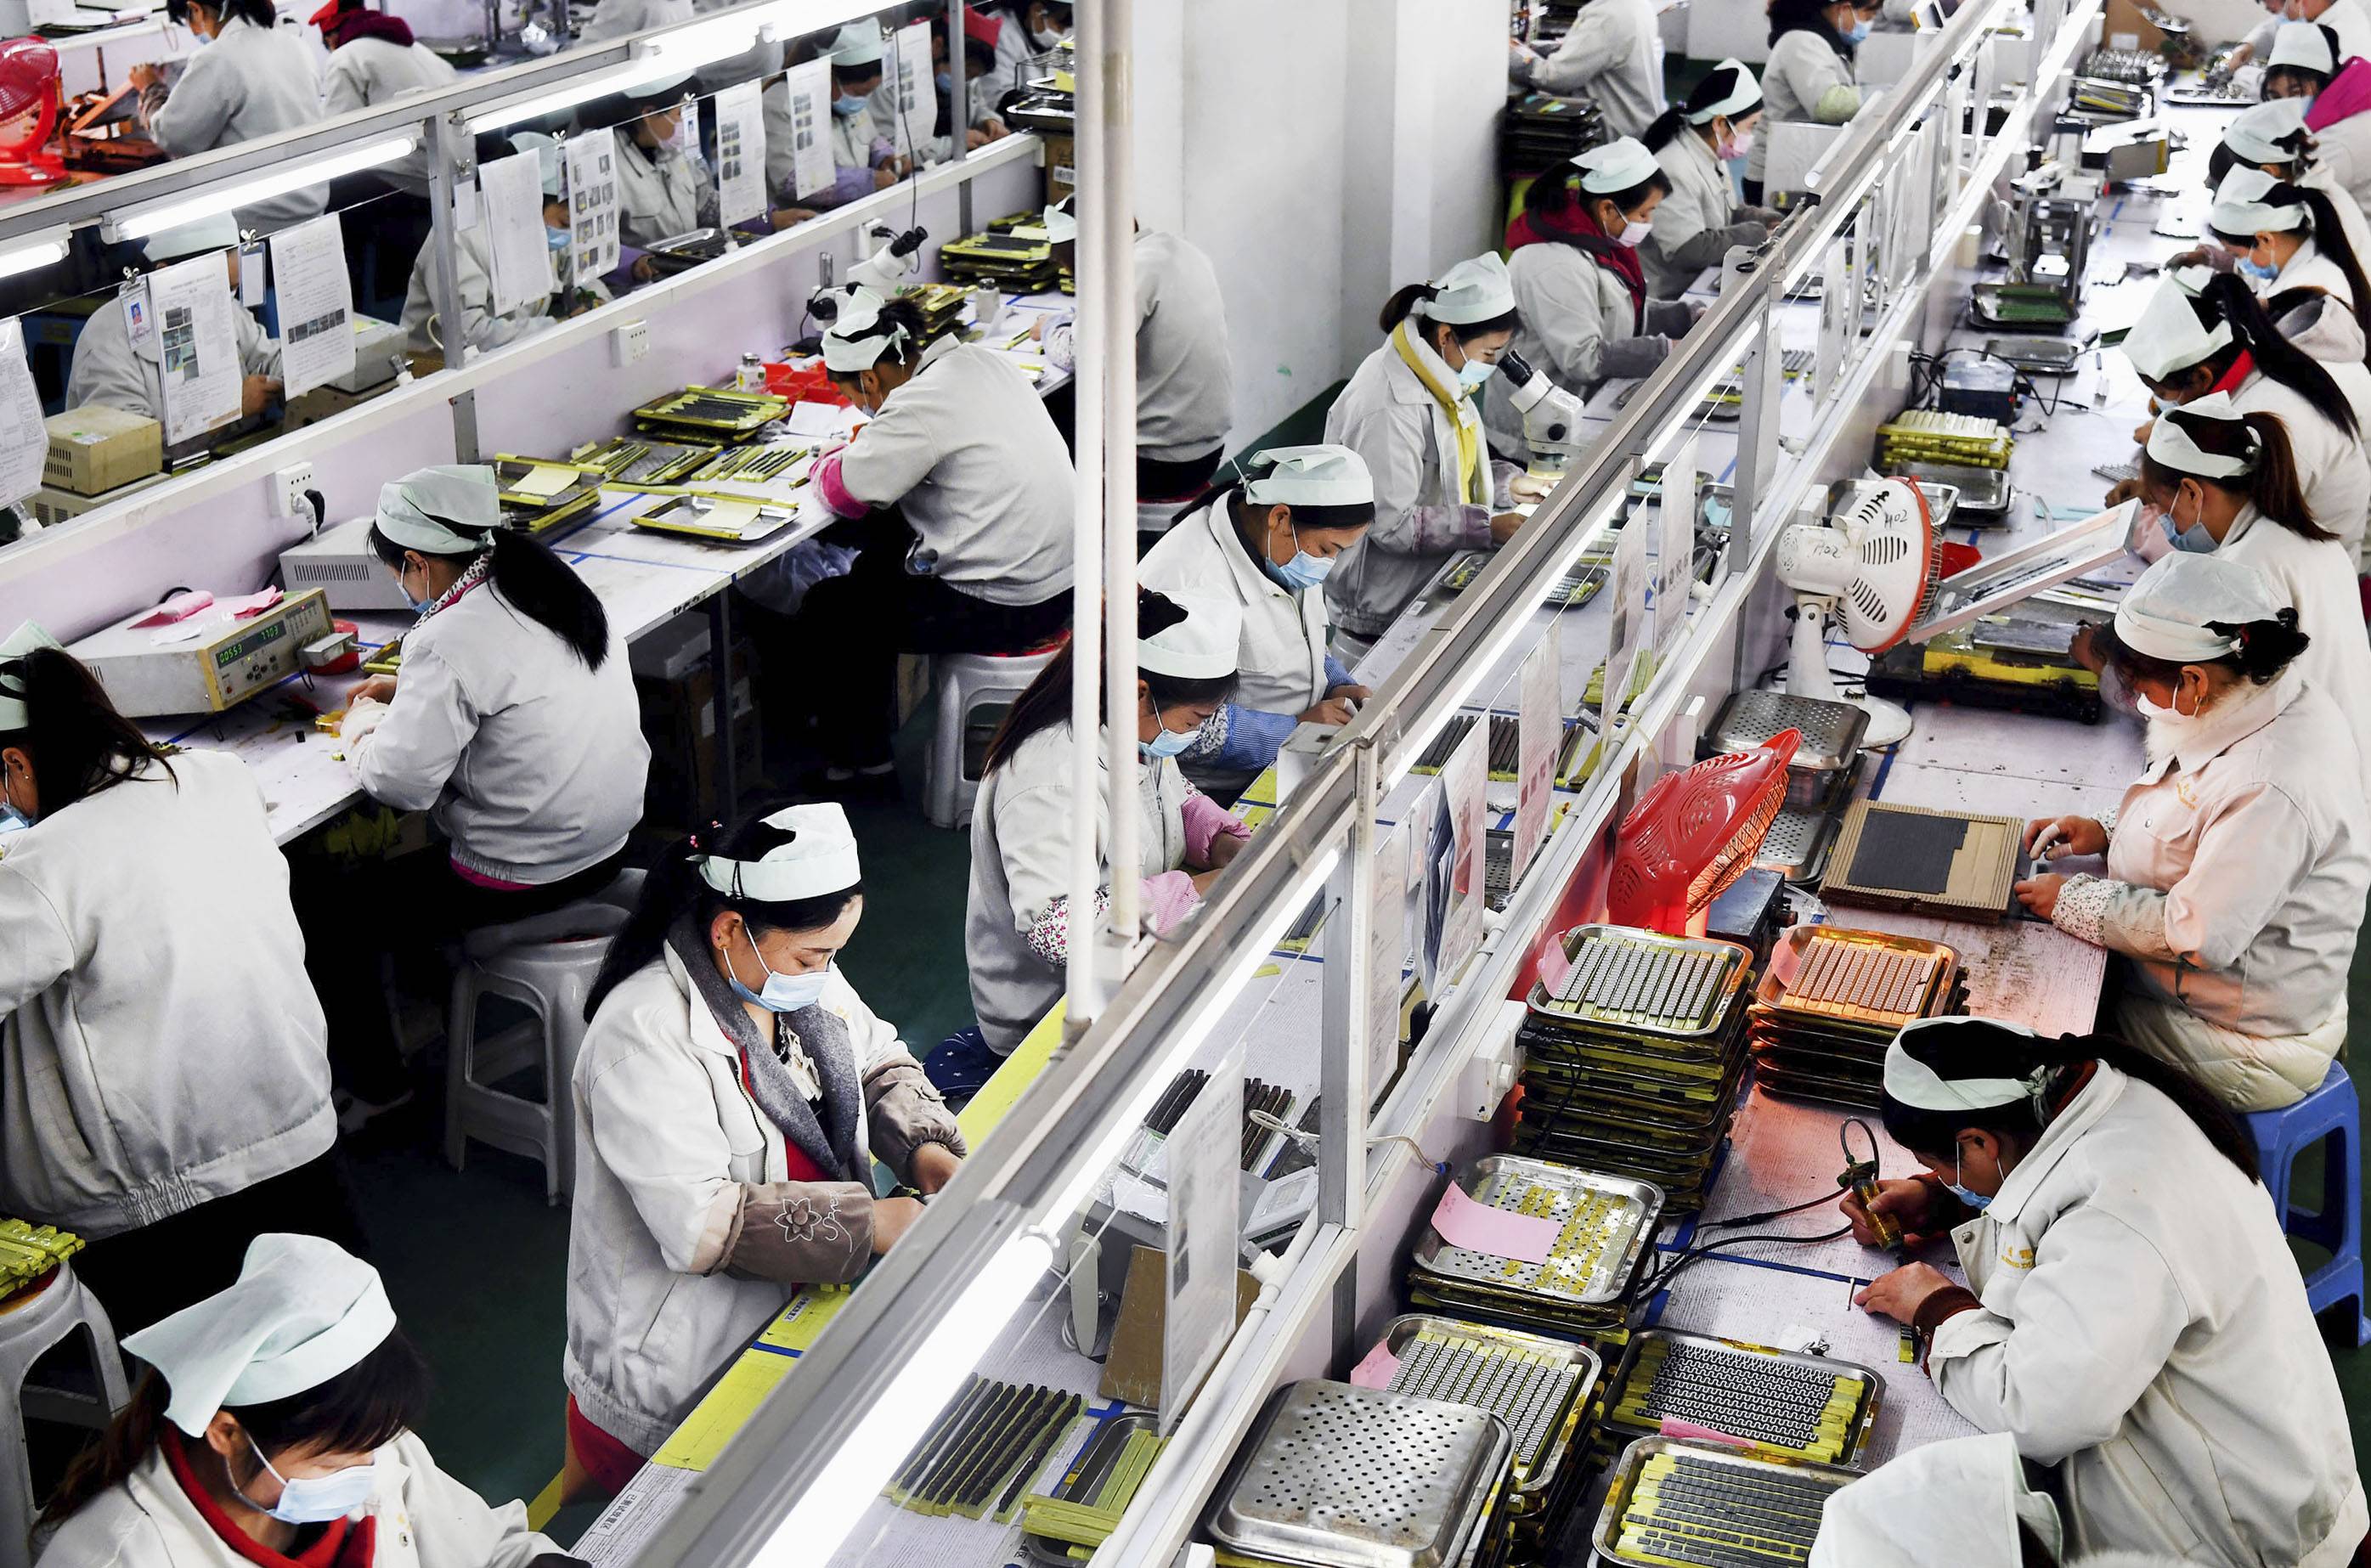 People work in a factory in China's Shaanxi Province in March. Nearly half of 96 major Japanese companies which responded to a survey said they are diversifying their supply chains to reduce reliance on China. | XINHUA NEWS AGENCY / VIA KYODO